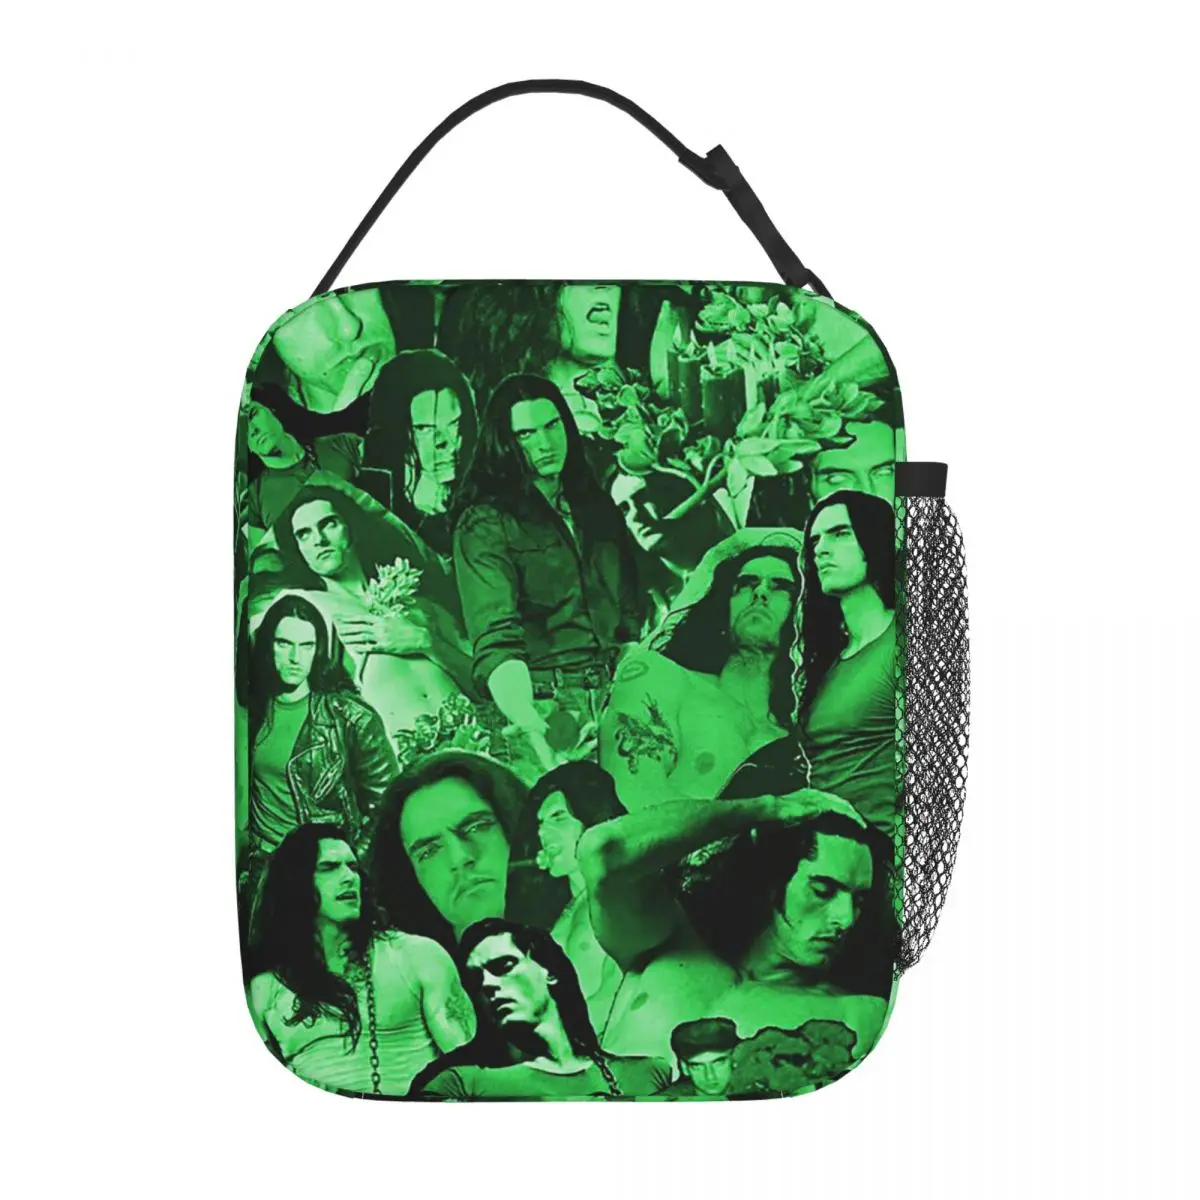 

The Green Man Peter Steele Dark Goth Collage Product Insulated Lunch Bag Storage Food Box New Arrival Thermal Cooler Bento Box